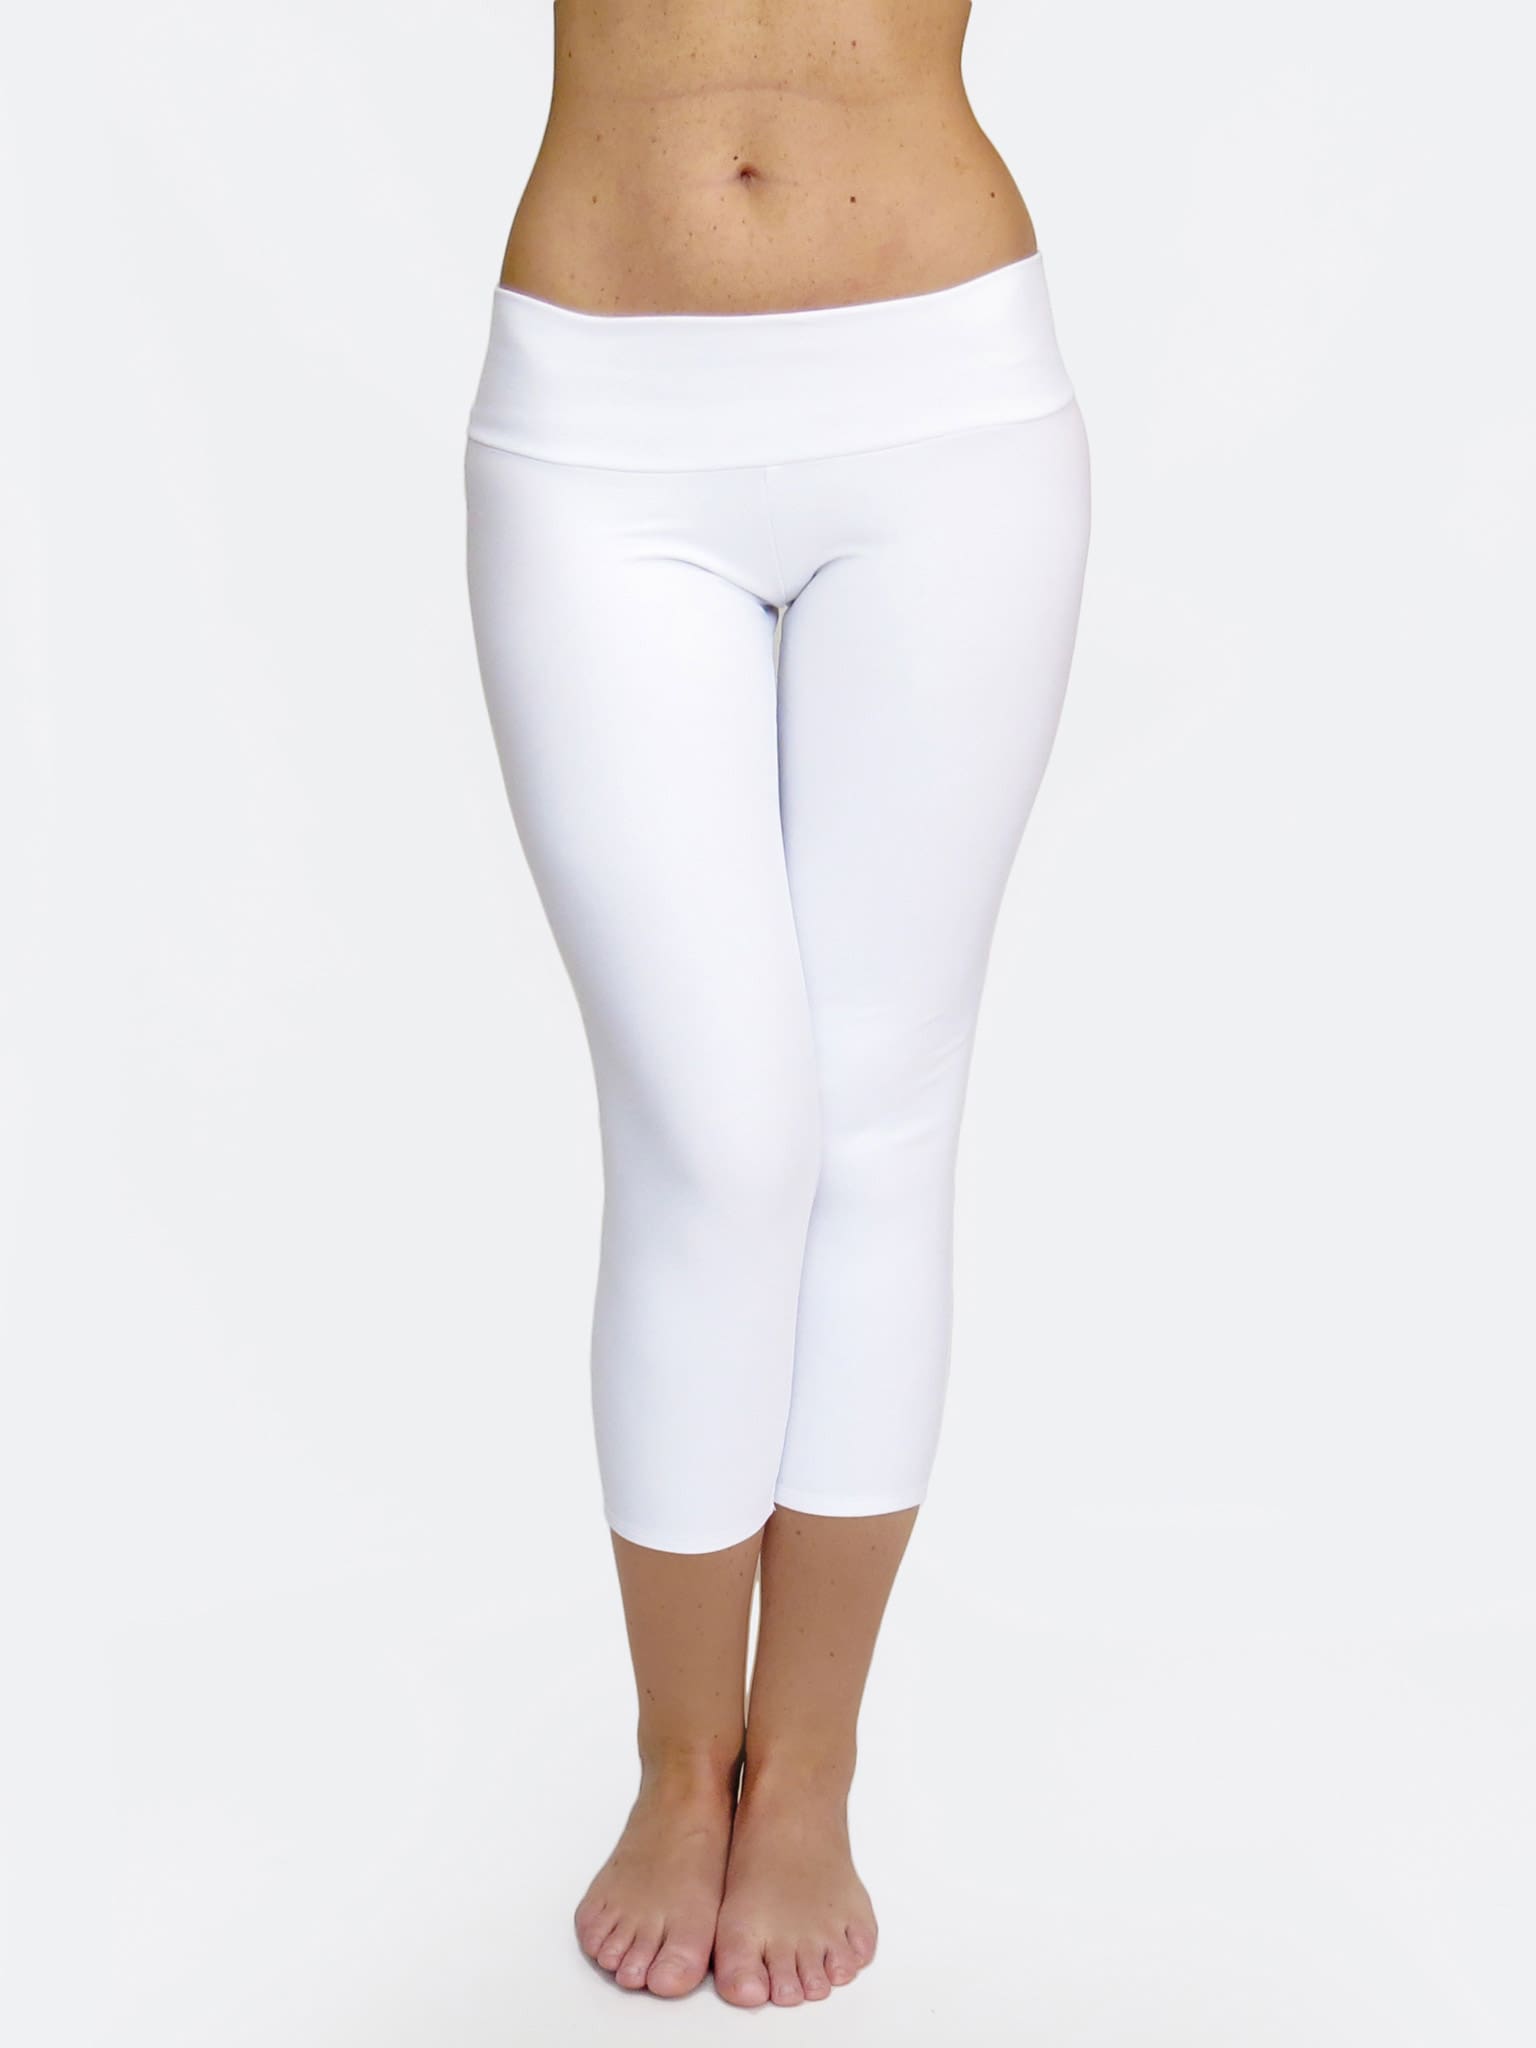 White Women's Low Waist Yoga Pants Comfortable for Workout